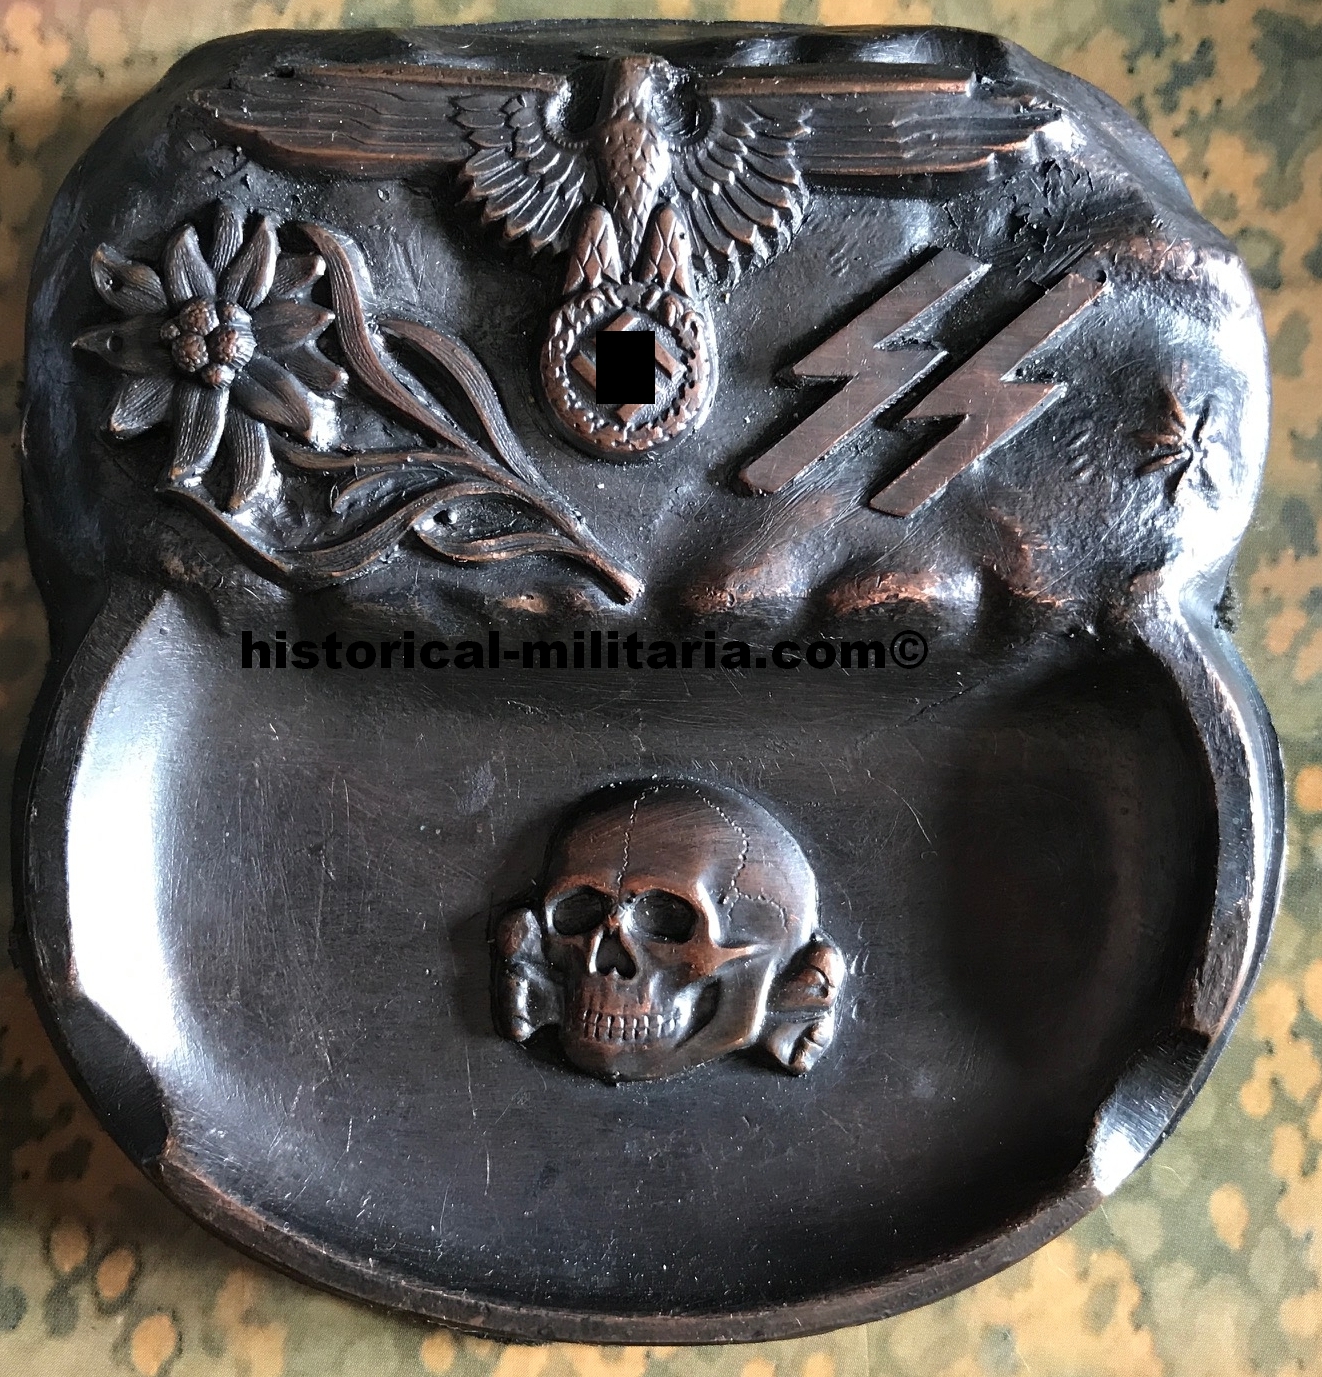 SS-Aschenbecher mit Hheitsabzeichen, Totenkopf und Edelweiss - SS Ashtray  with Edelweiss, SS Eagle and Death Head - R.I. International Trading Company